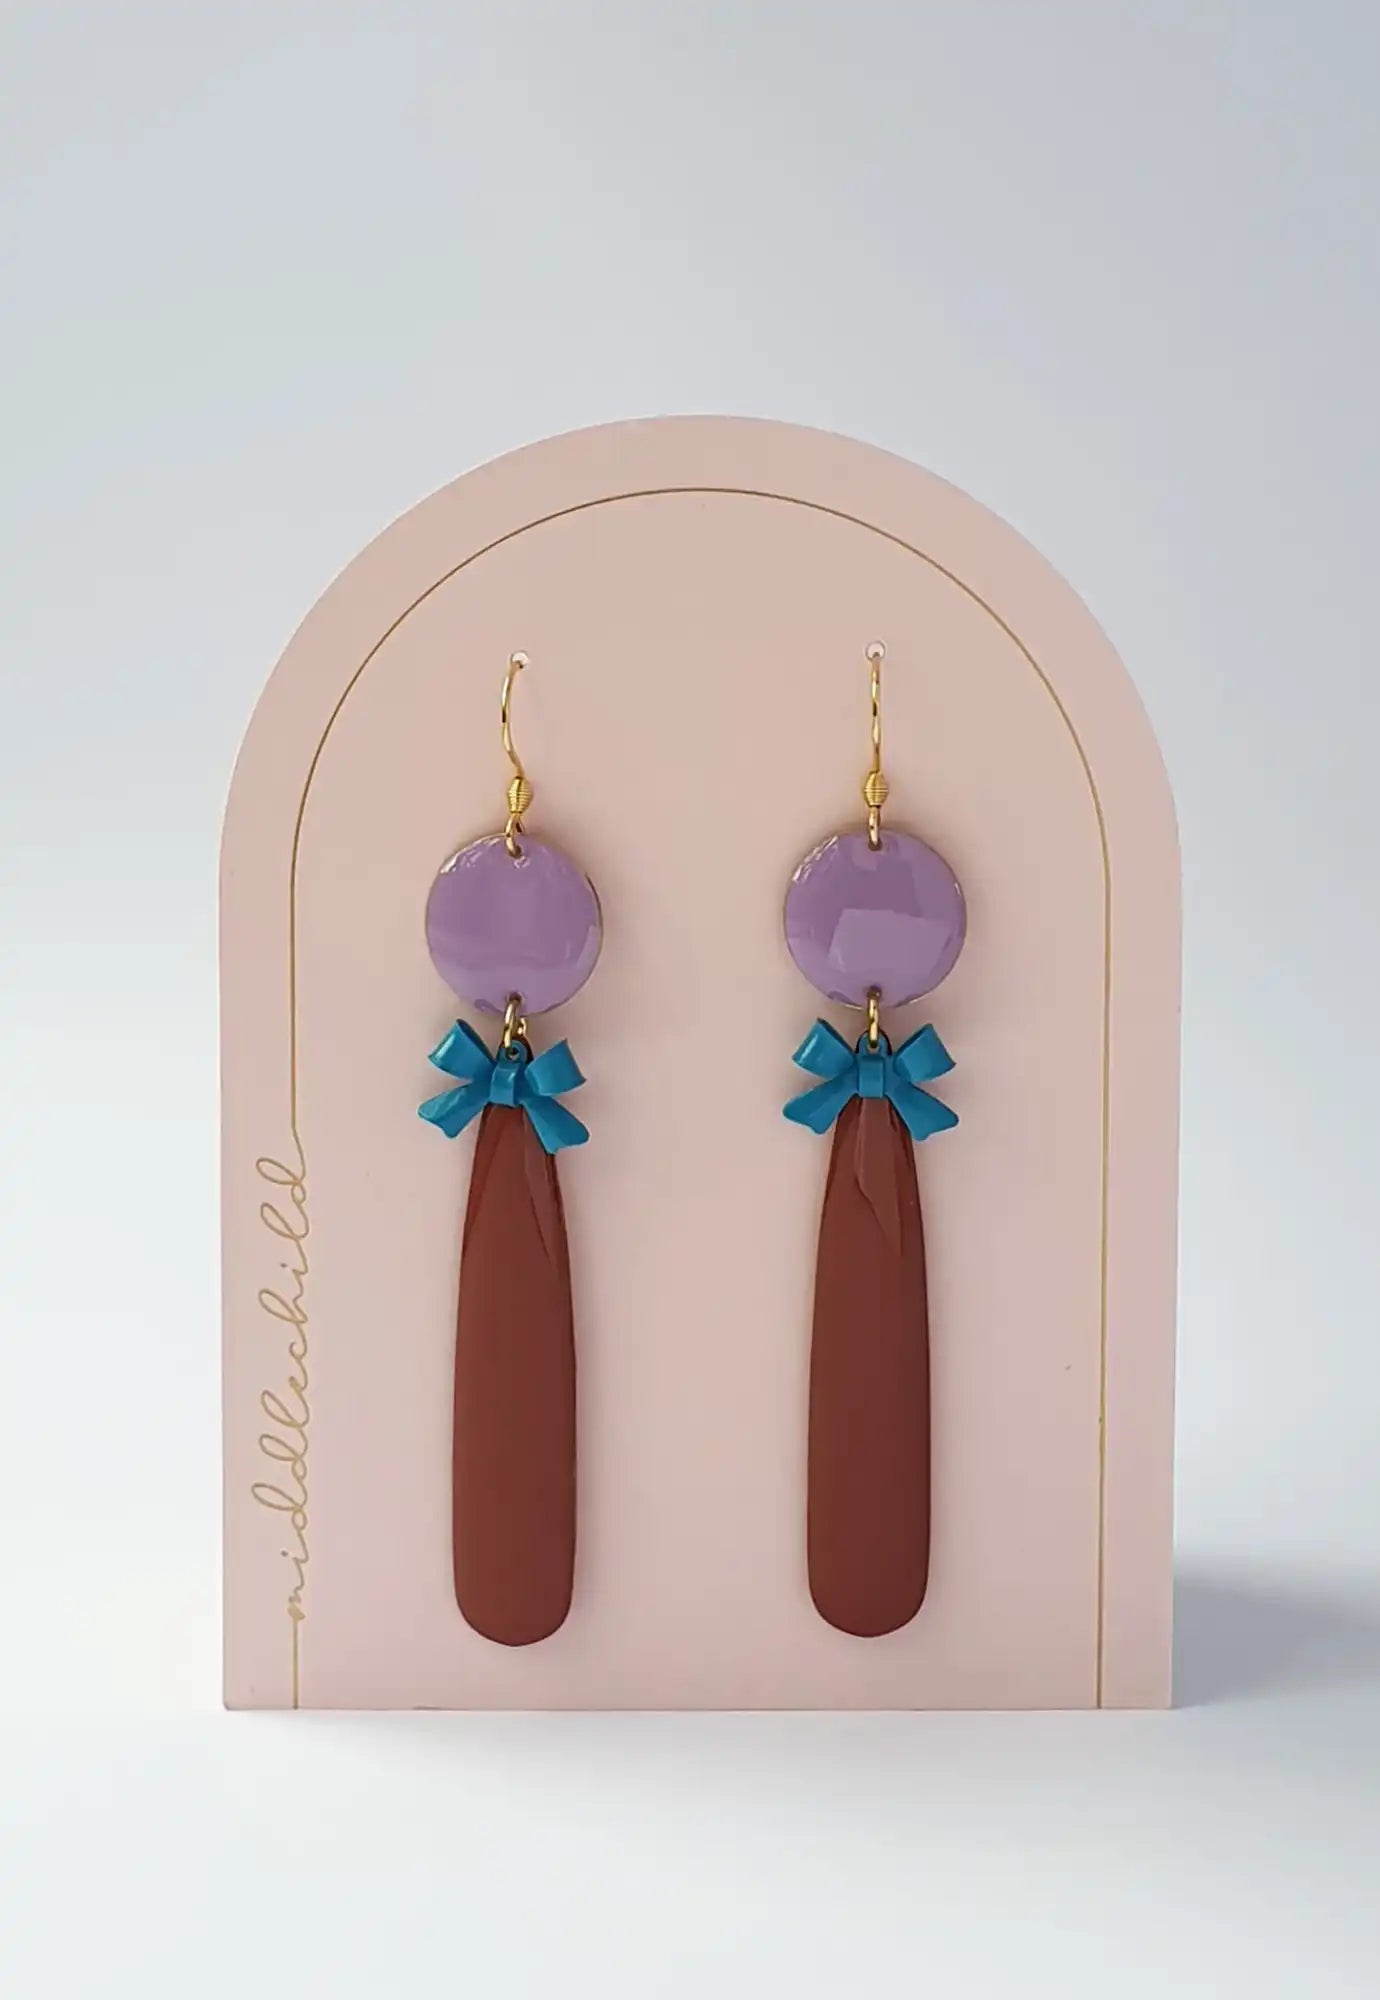 middle child - bowie earrings